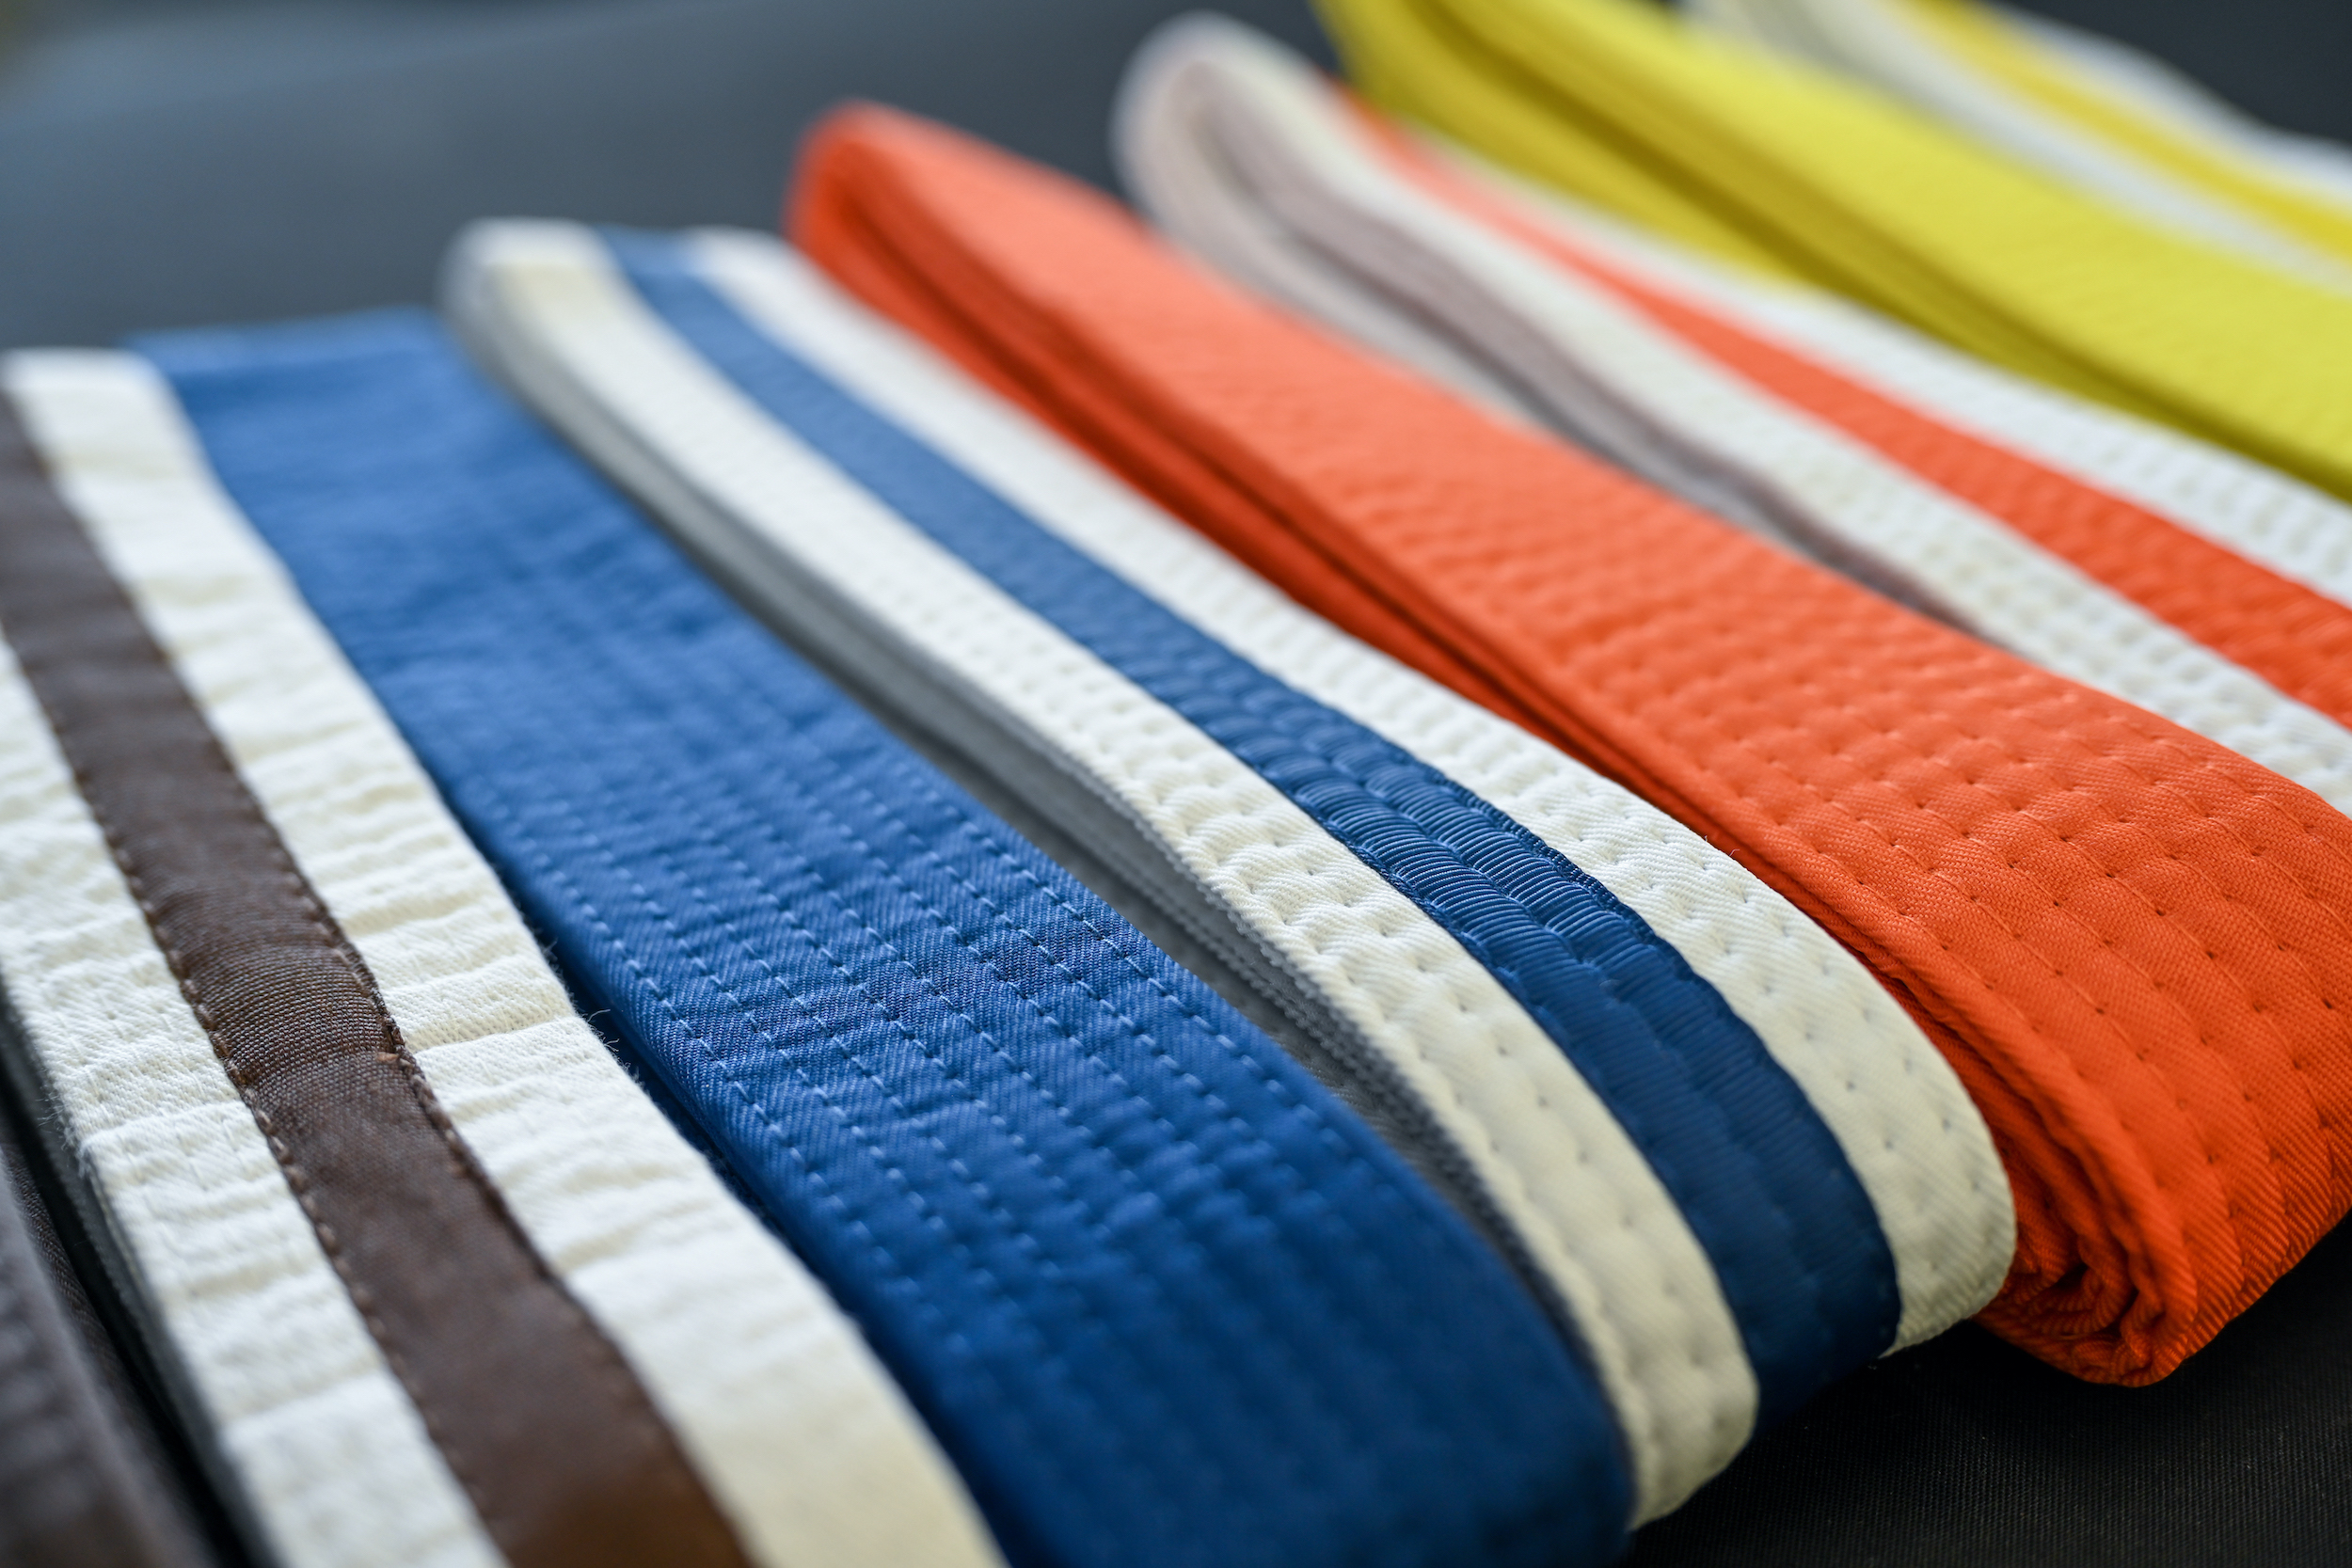 Taekwondo belts of various colors lie on a table in a row. Some are white with a color stripe and some are solid colors.